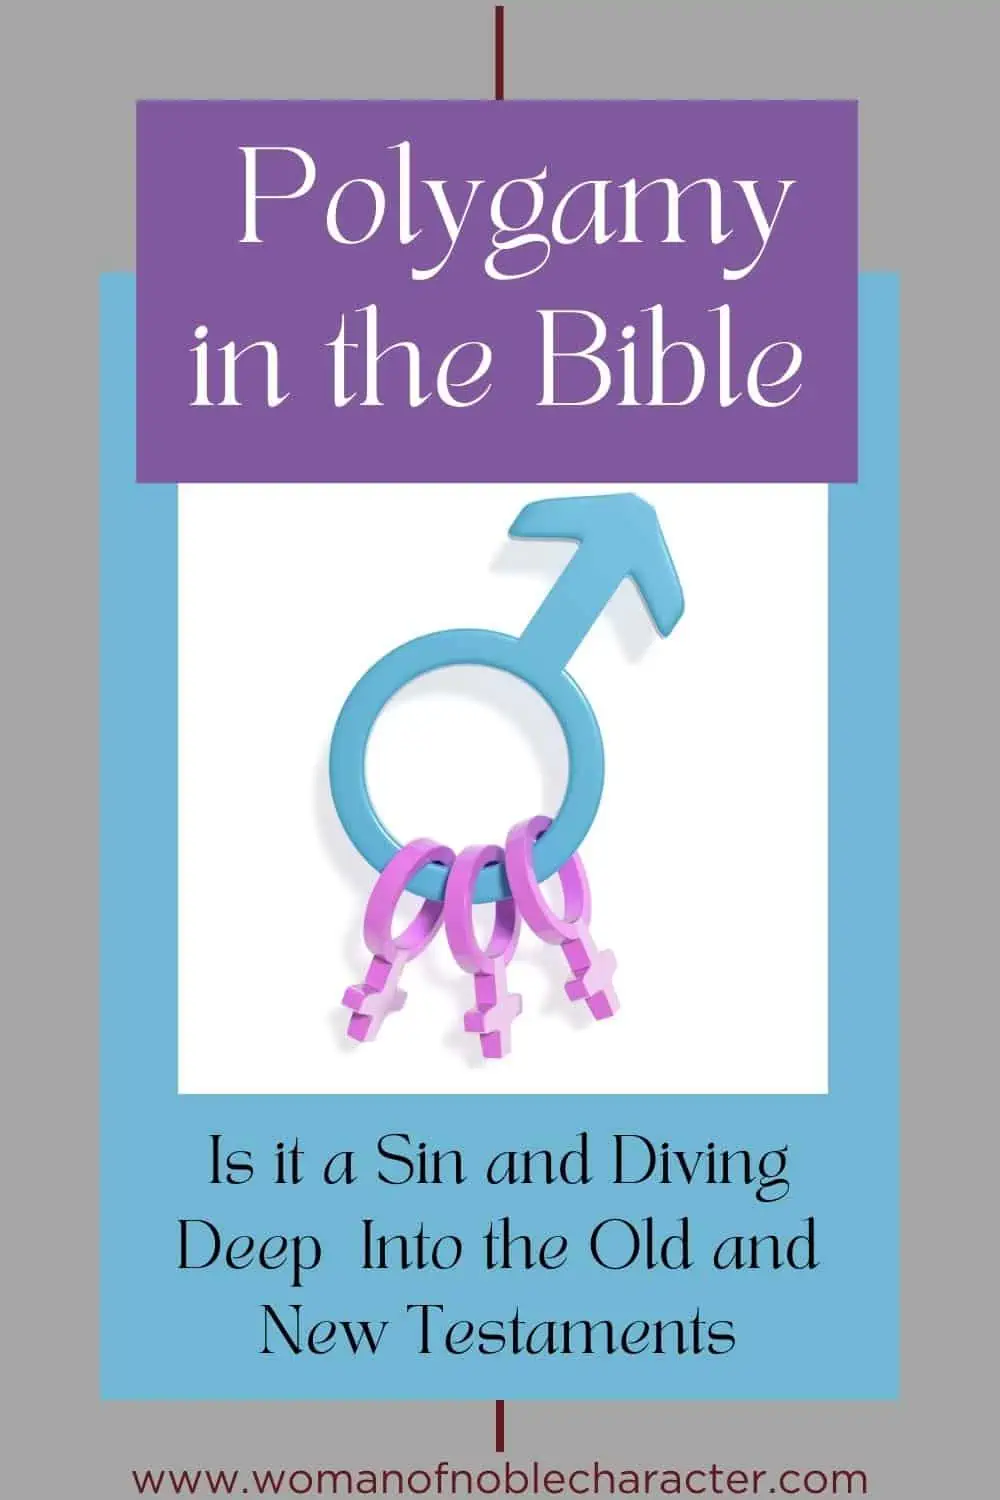 3d rendering of isolated men symbol with three women symbols with the text Polygamy in the Bible: Is it a sin and diving deep into the old and new testaments